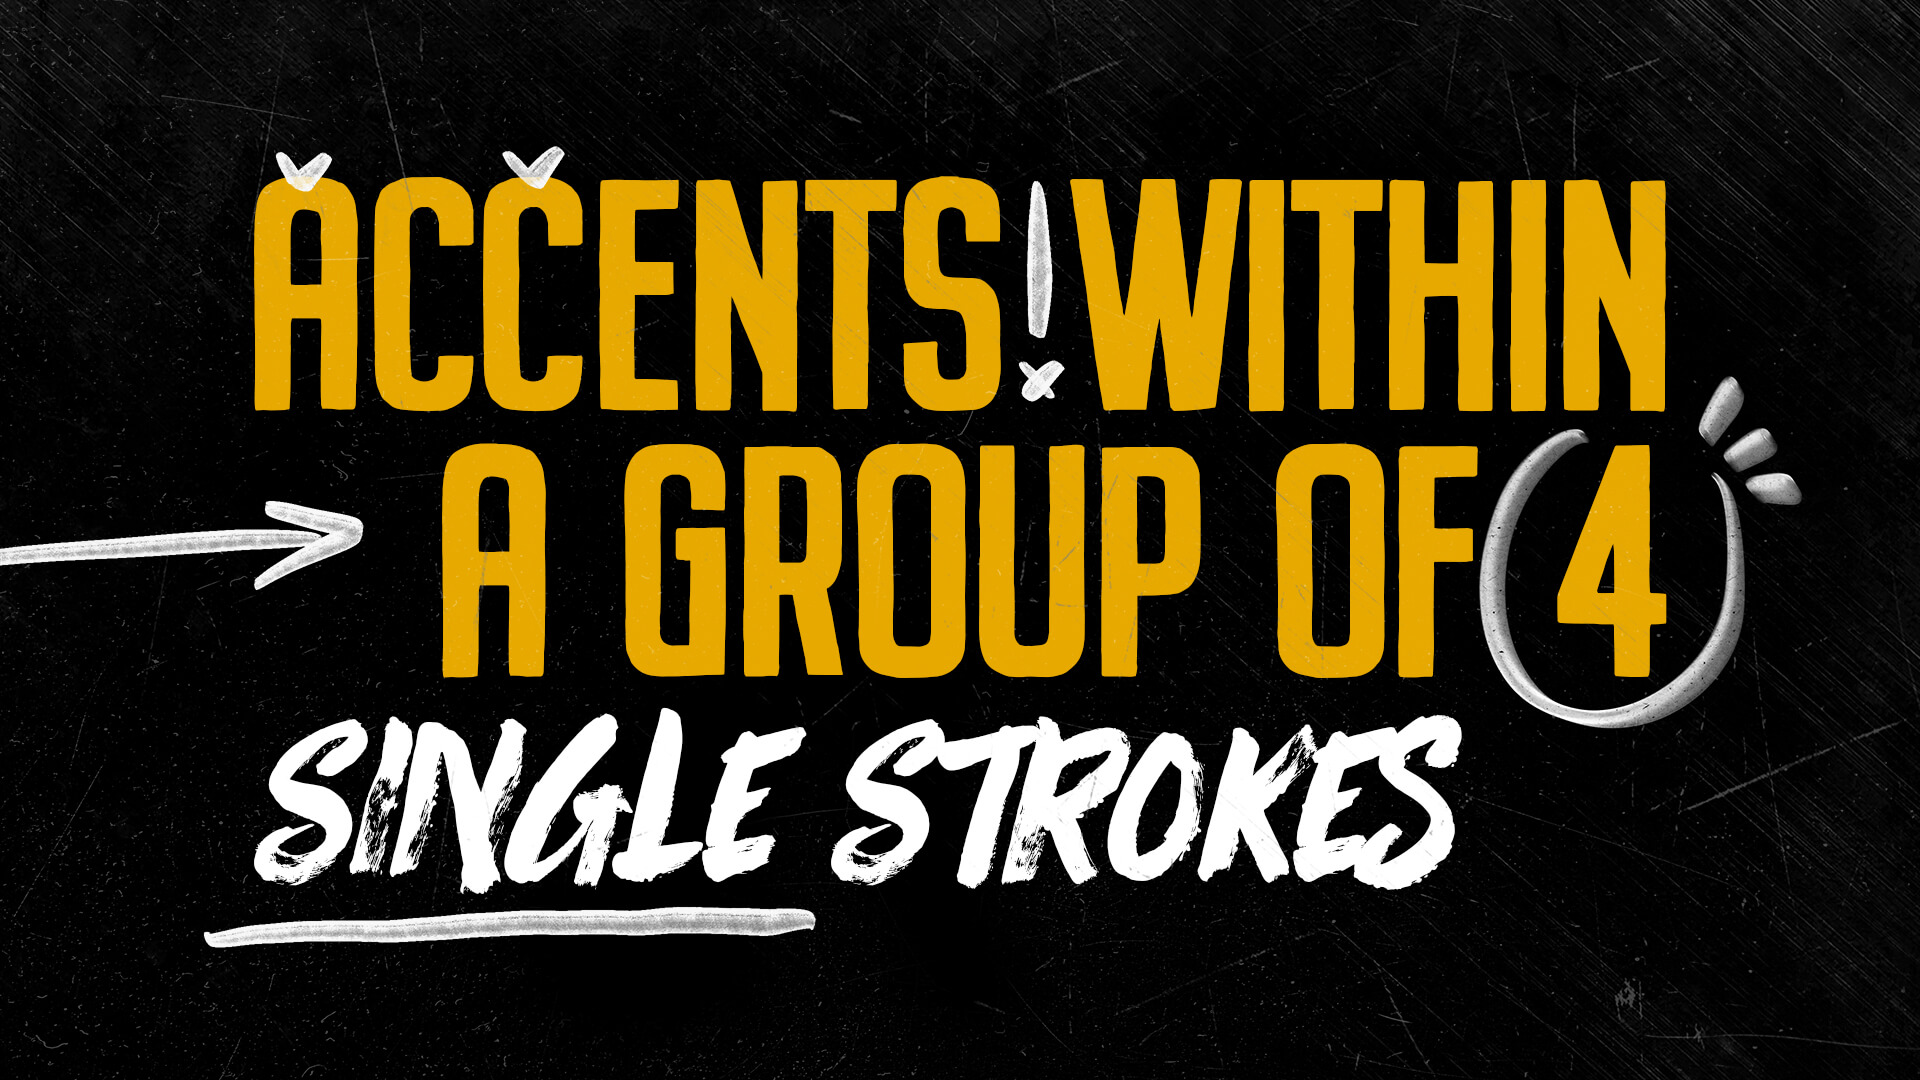 POG chapter 1 lesson 1 accents within a group of 4 single strokes thumbnail web